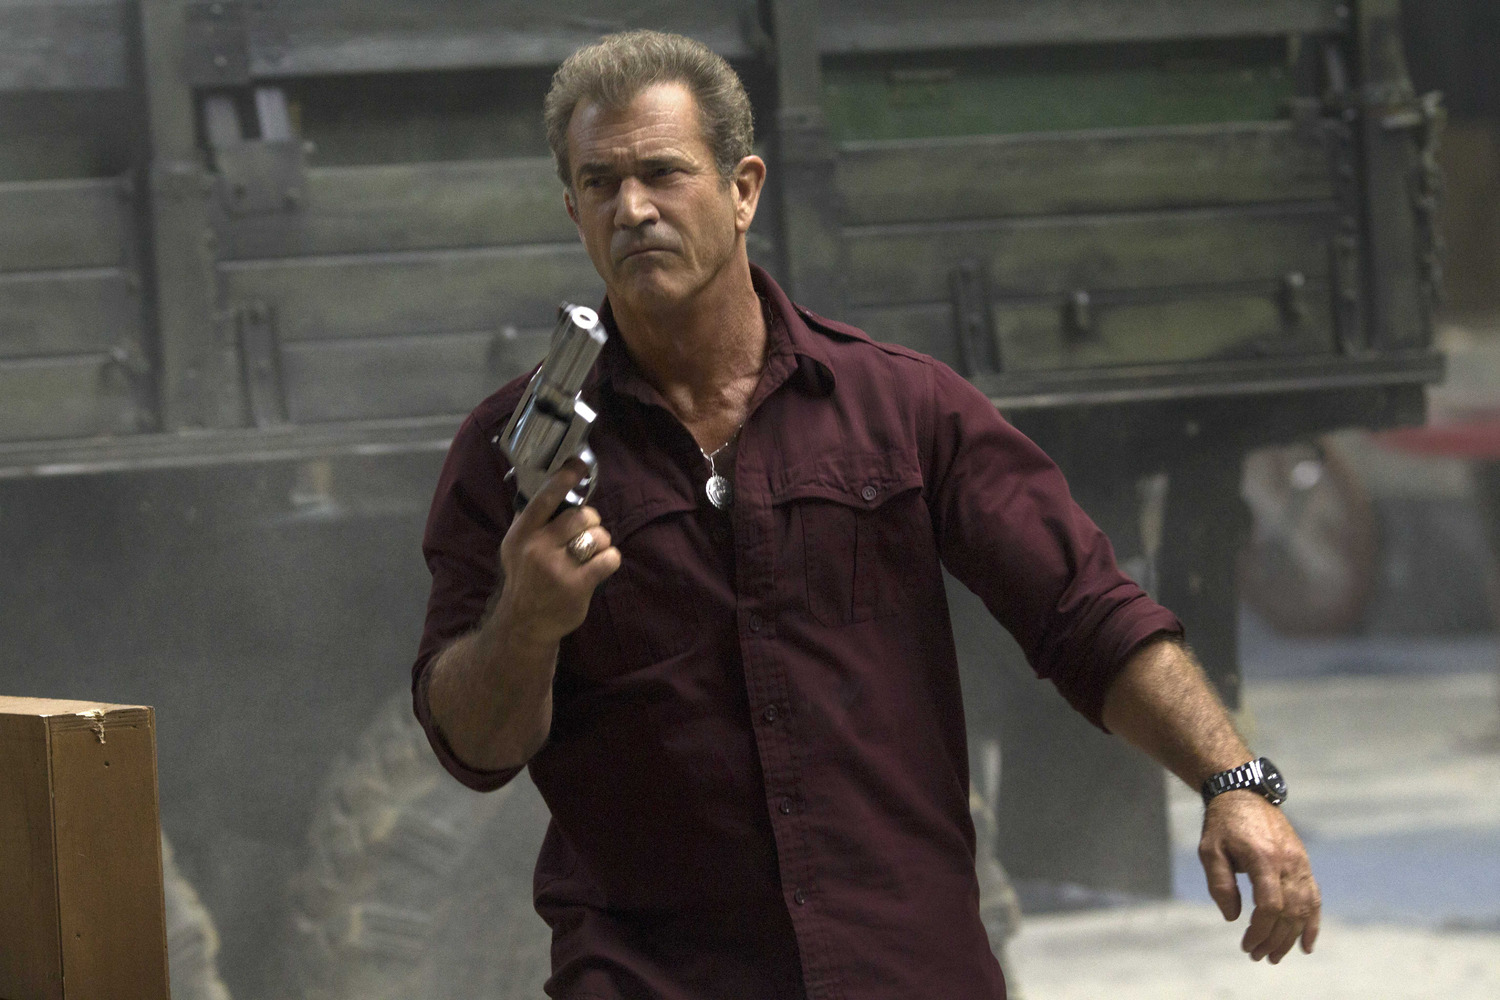 expendables-3-the-expendables-3-20-08-2014-31-g.jpg